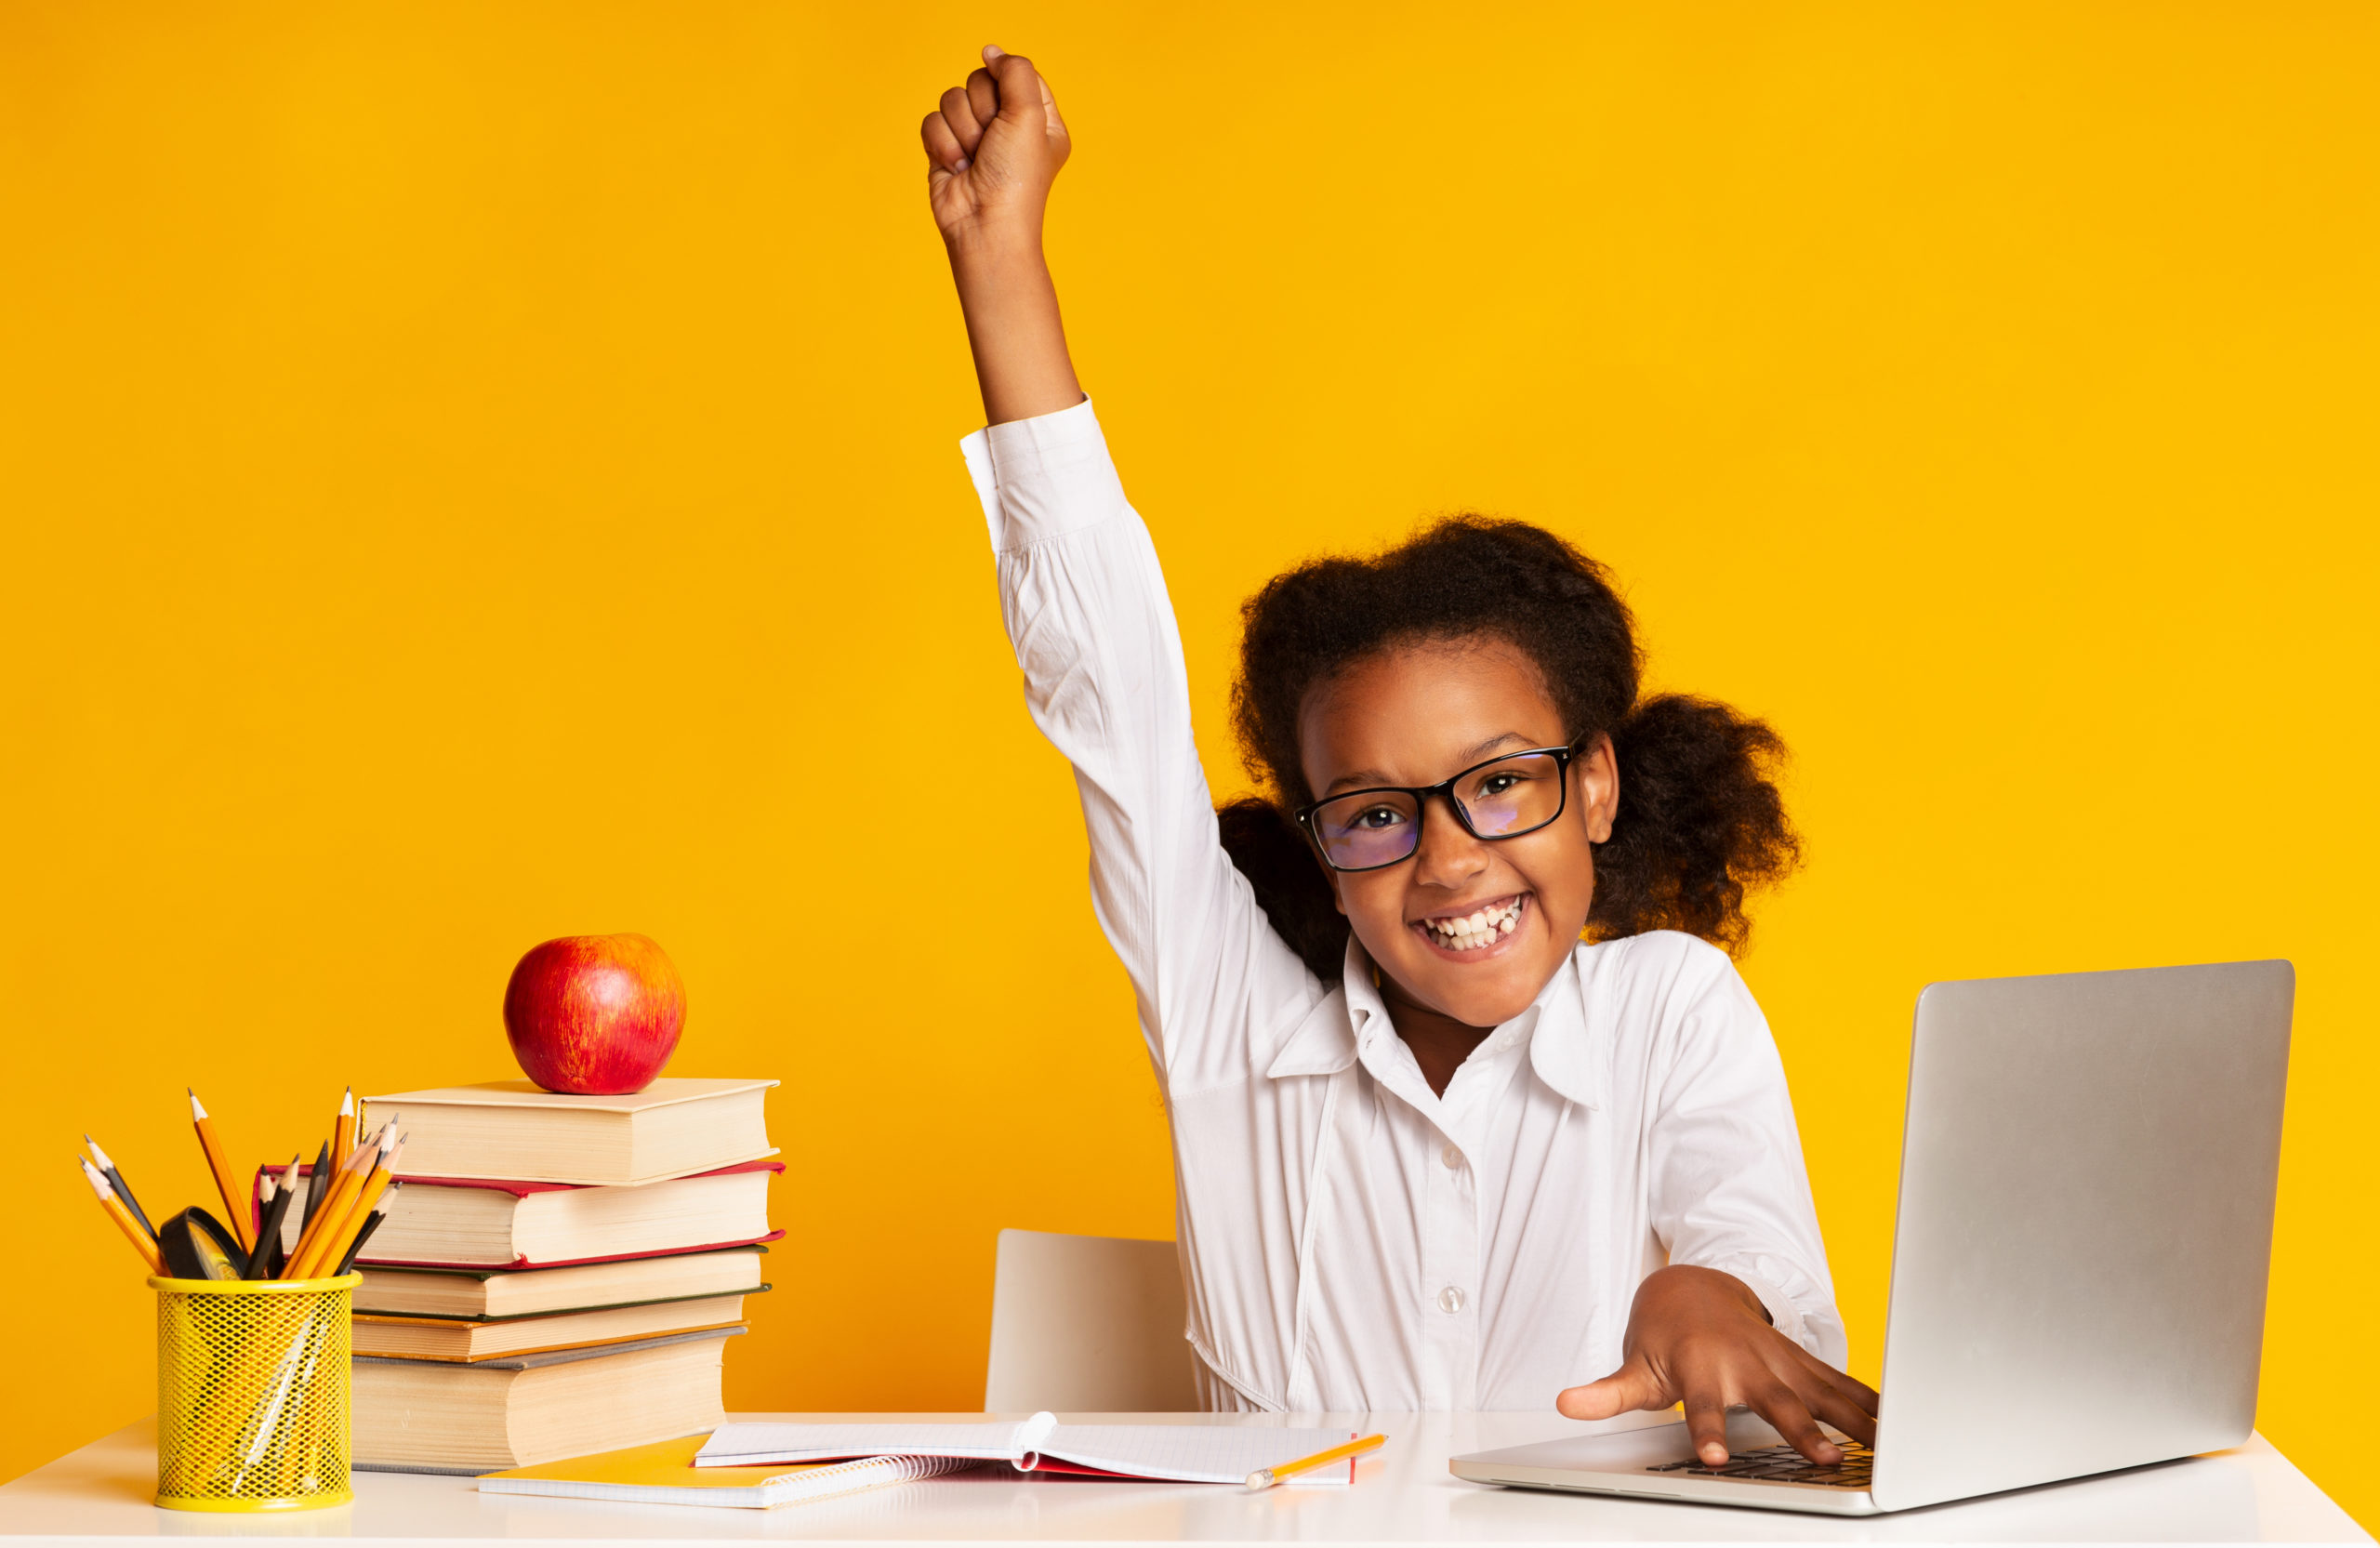 A girl child at a desk with books, an apple, and a laptop, raising one hand